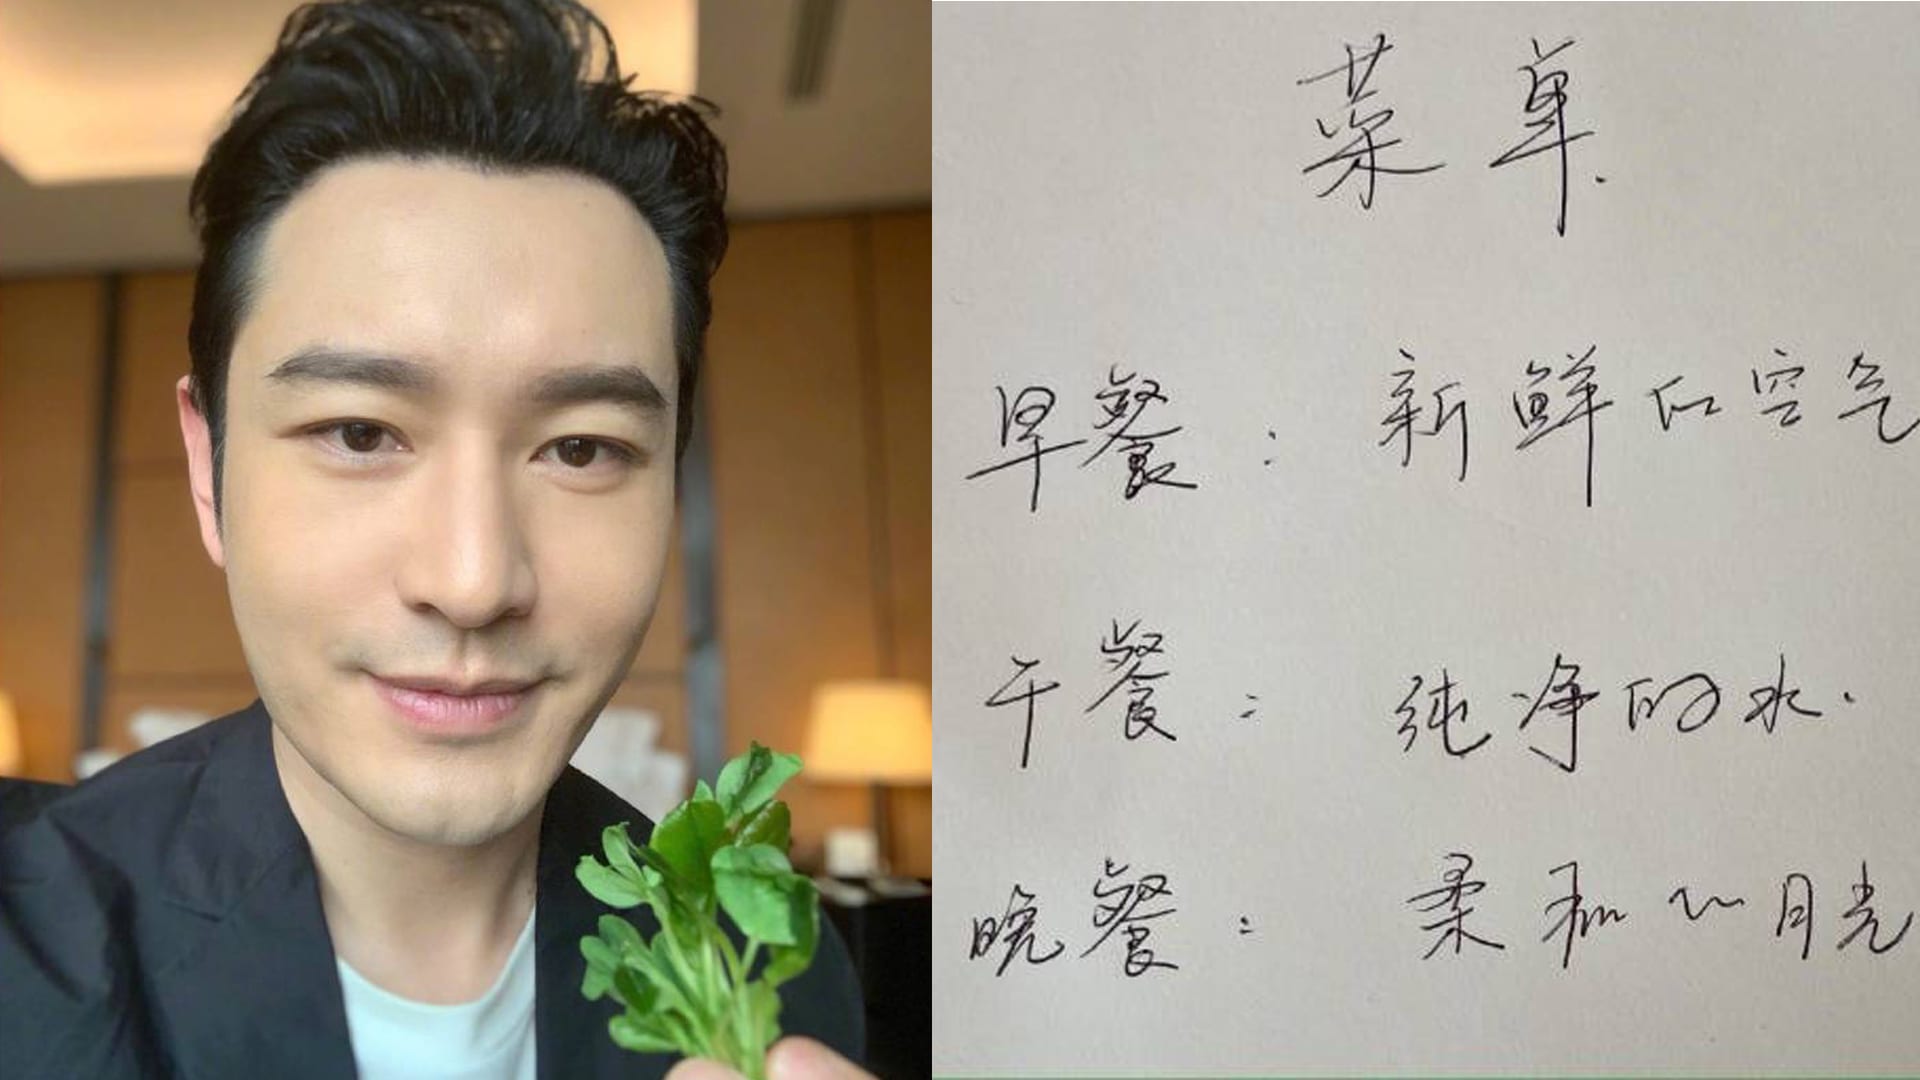 Huang Xiaoming Says He Lost 12kg 'Cos He Has "Fresh Air" For Breakfast And "Moonlight" For Dinner